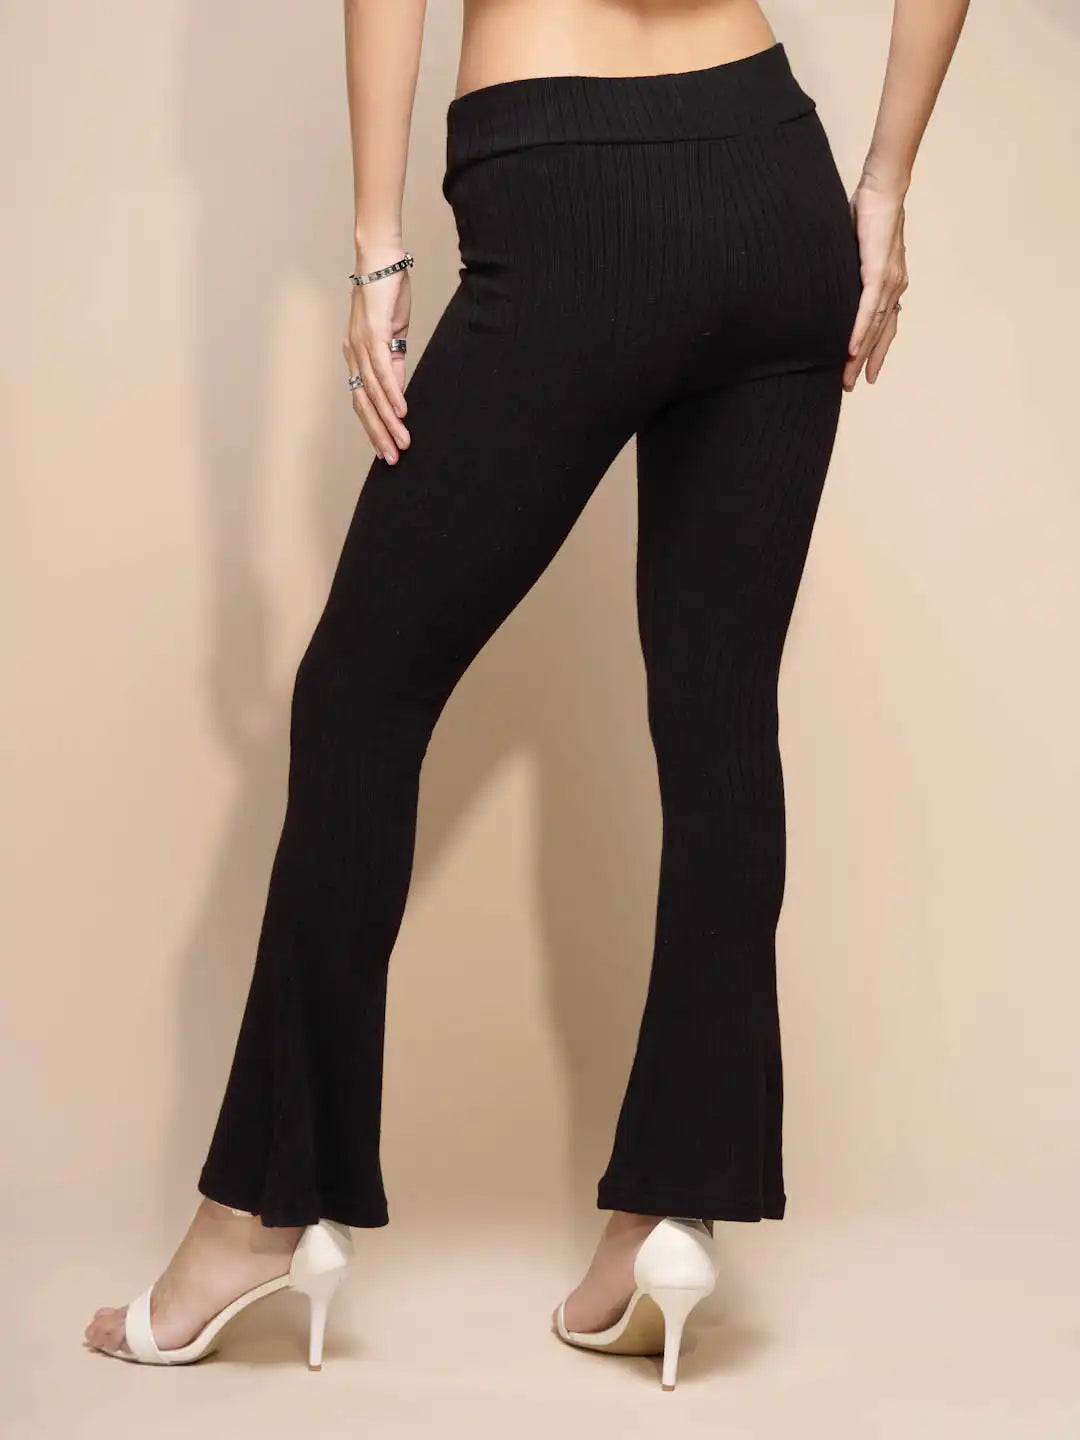 Black Solid Low Rise Polyester Legging